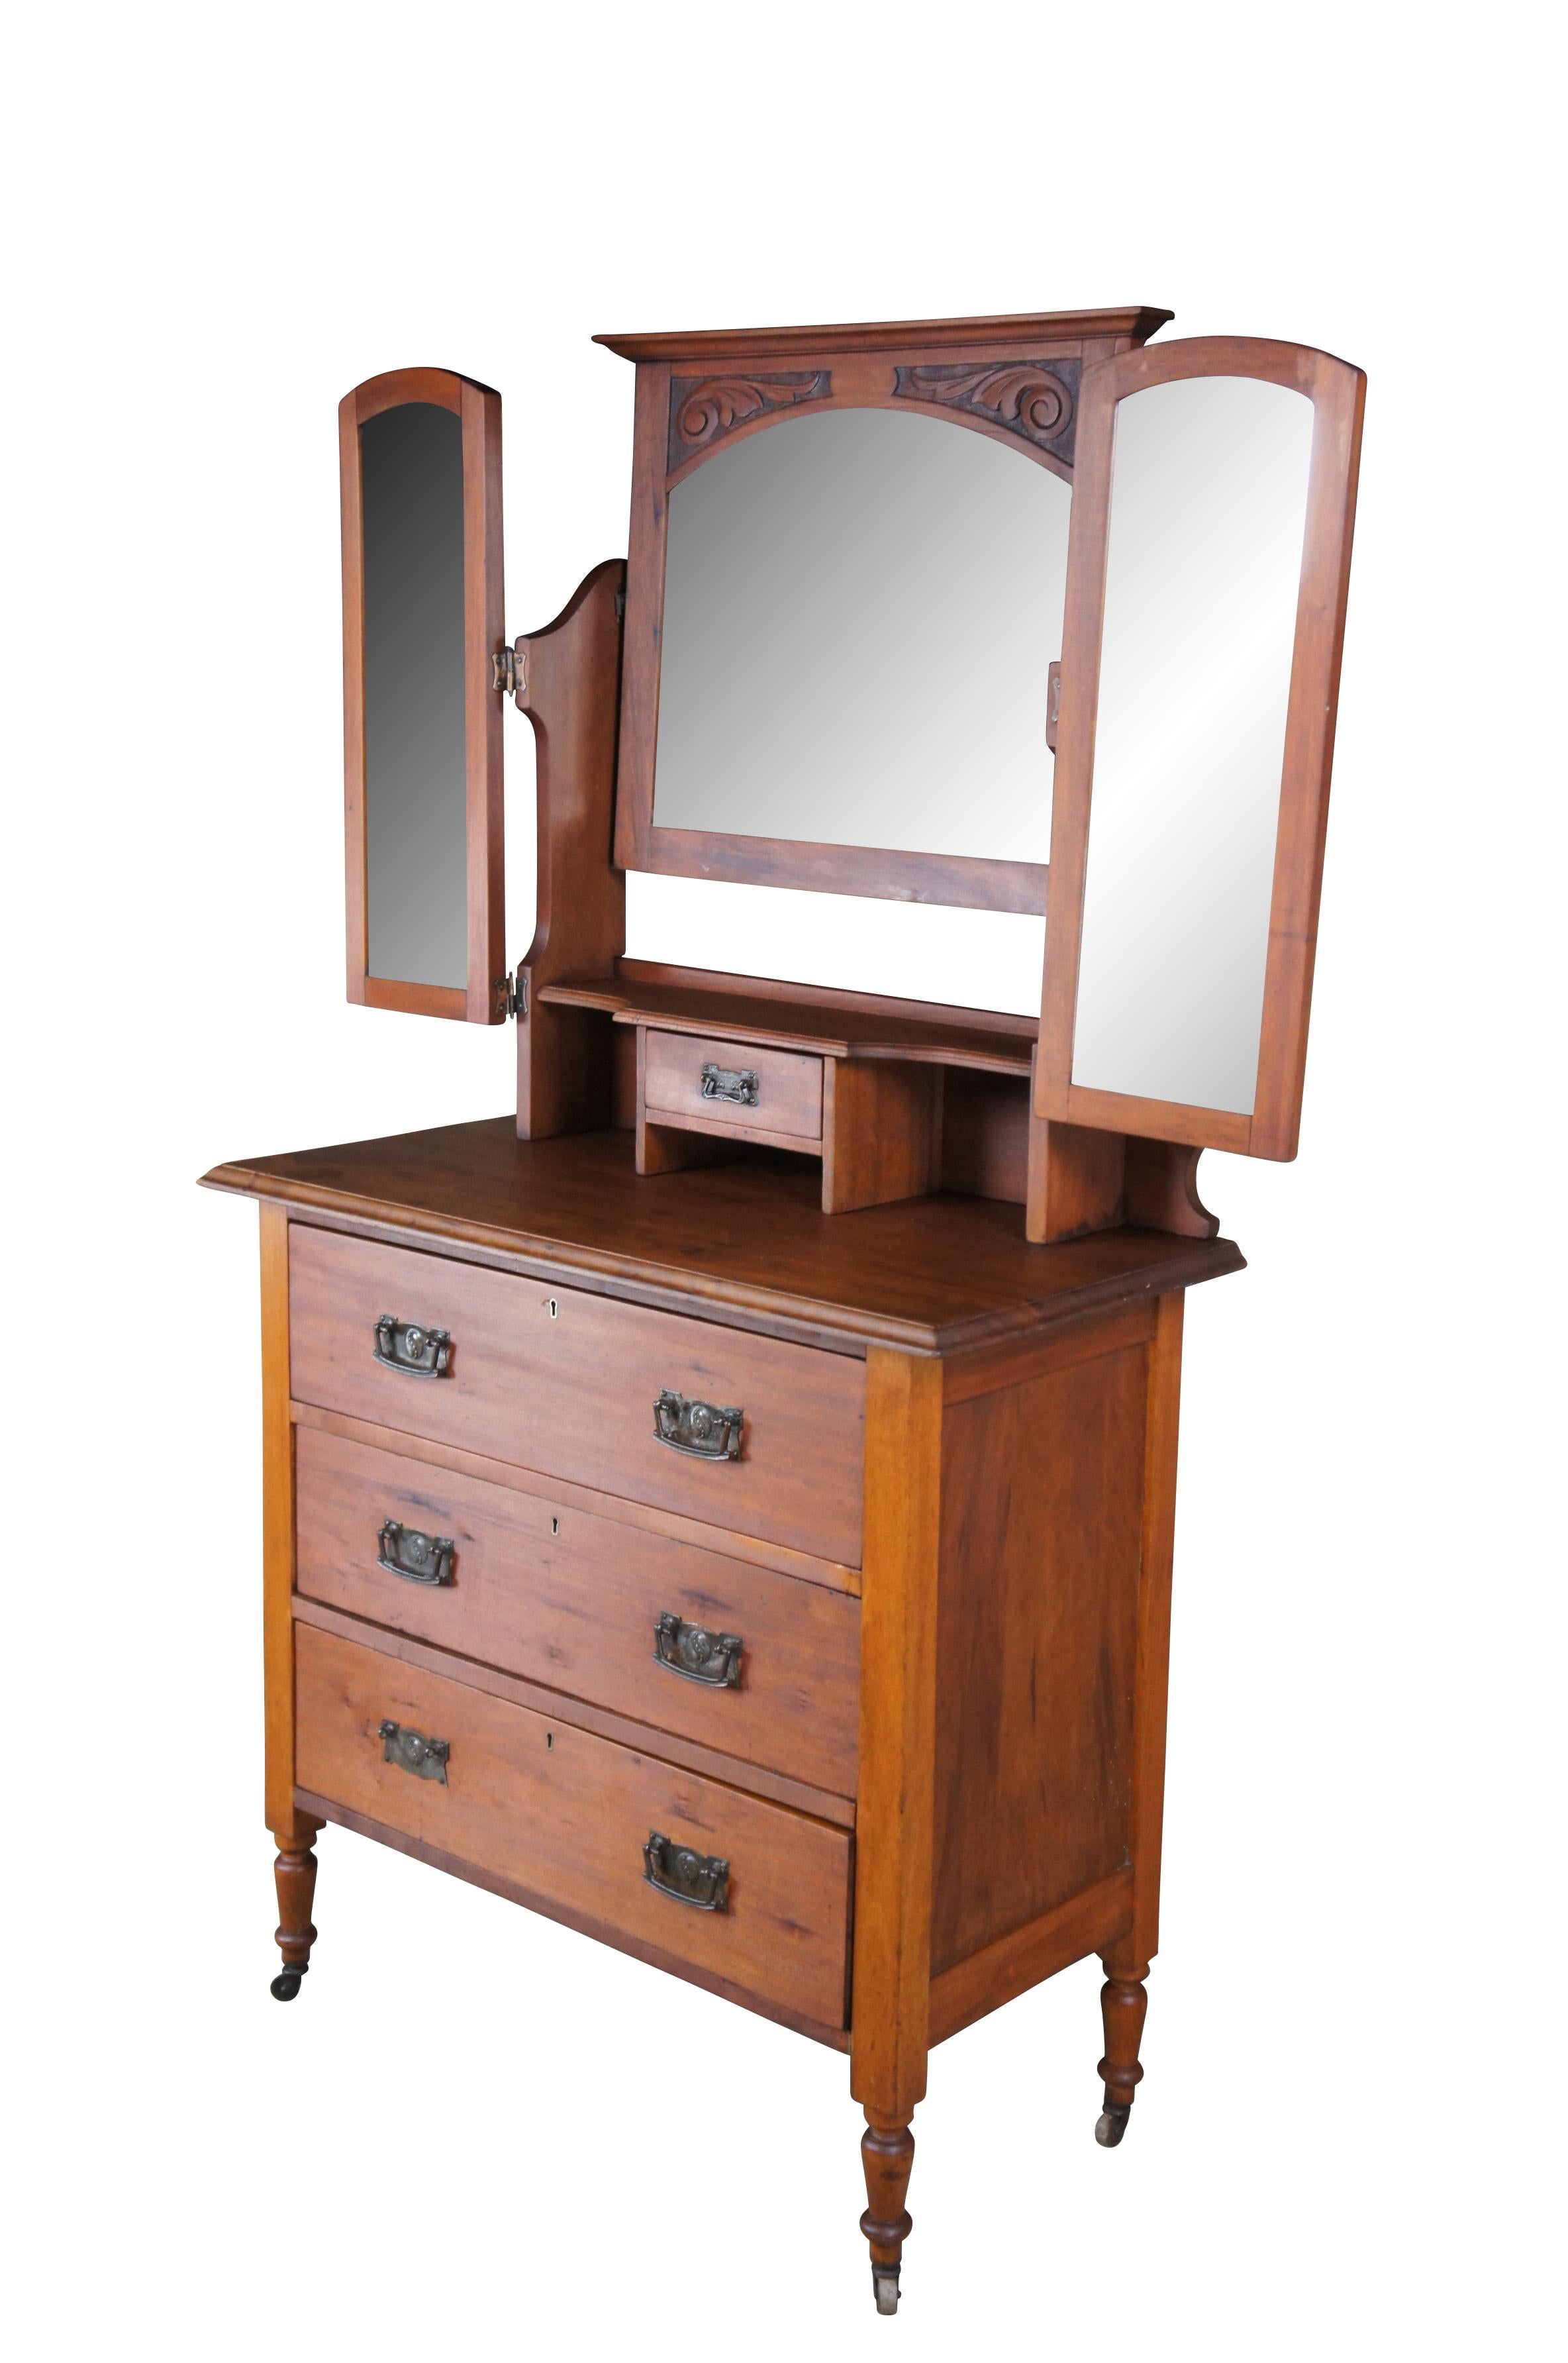 Antique Victorian vanity dresser or shaving stand.  Made of walnut and poplar featuring Eastlake styling with three beveled folding mirrors and four drawers.

Dimensions:
36